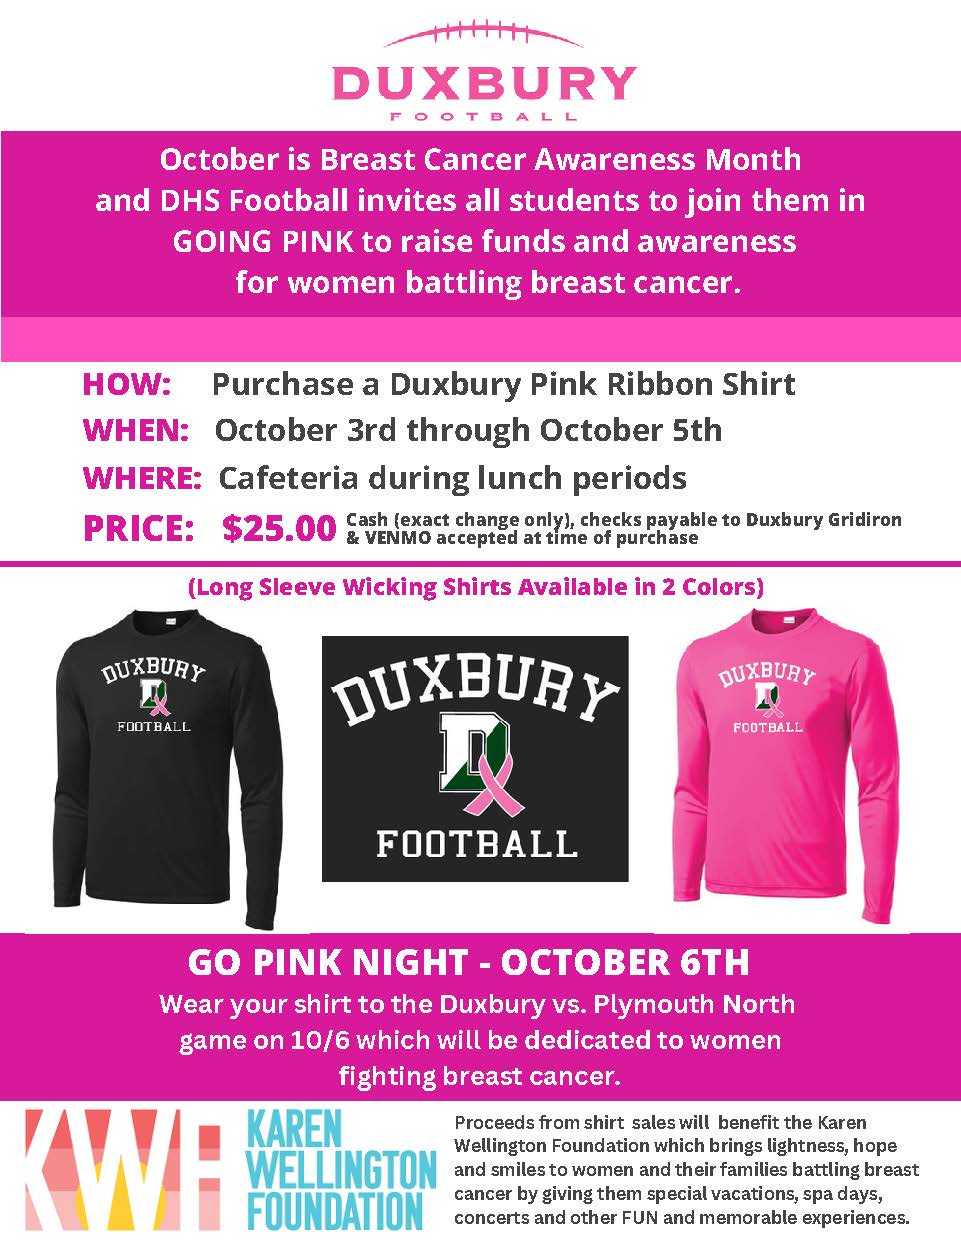 October is Breast Cancer Awareness Month and DHS Football invites all students to join them in GOING PINK to raise funds and awareness for women battling breast cancer